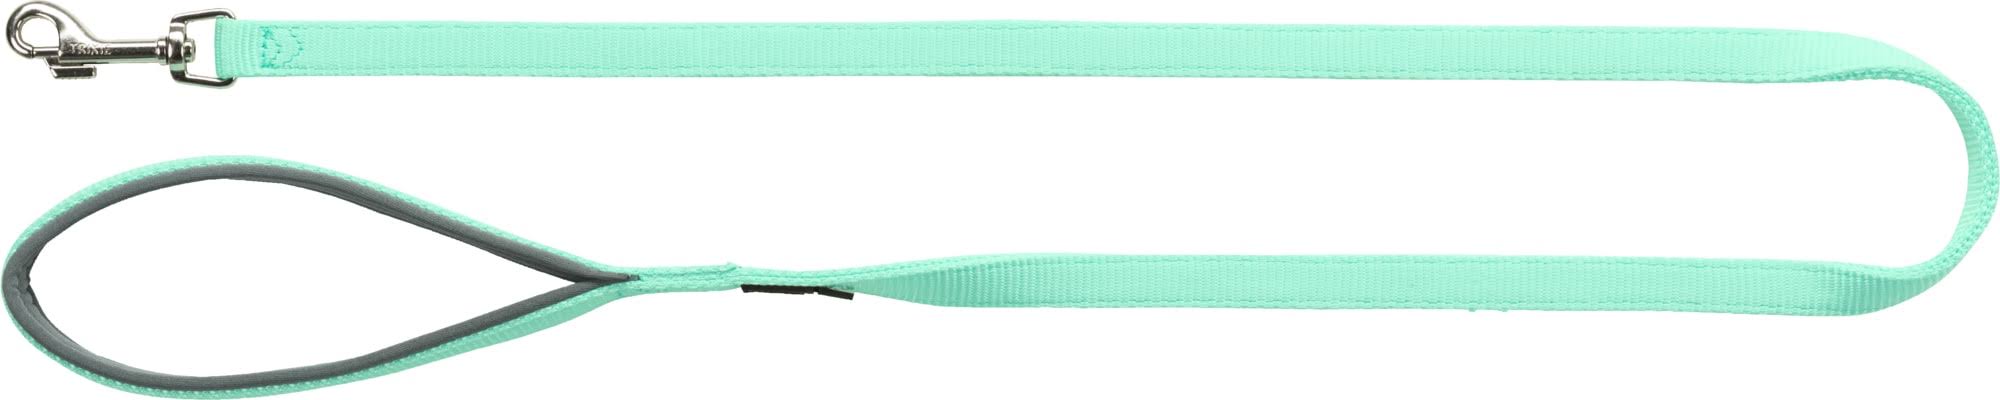 Trixie Premium Leash For Dogs Mint - Extra Small/Small - 1.20 m/15 mm